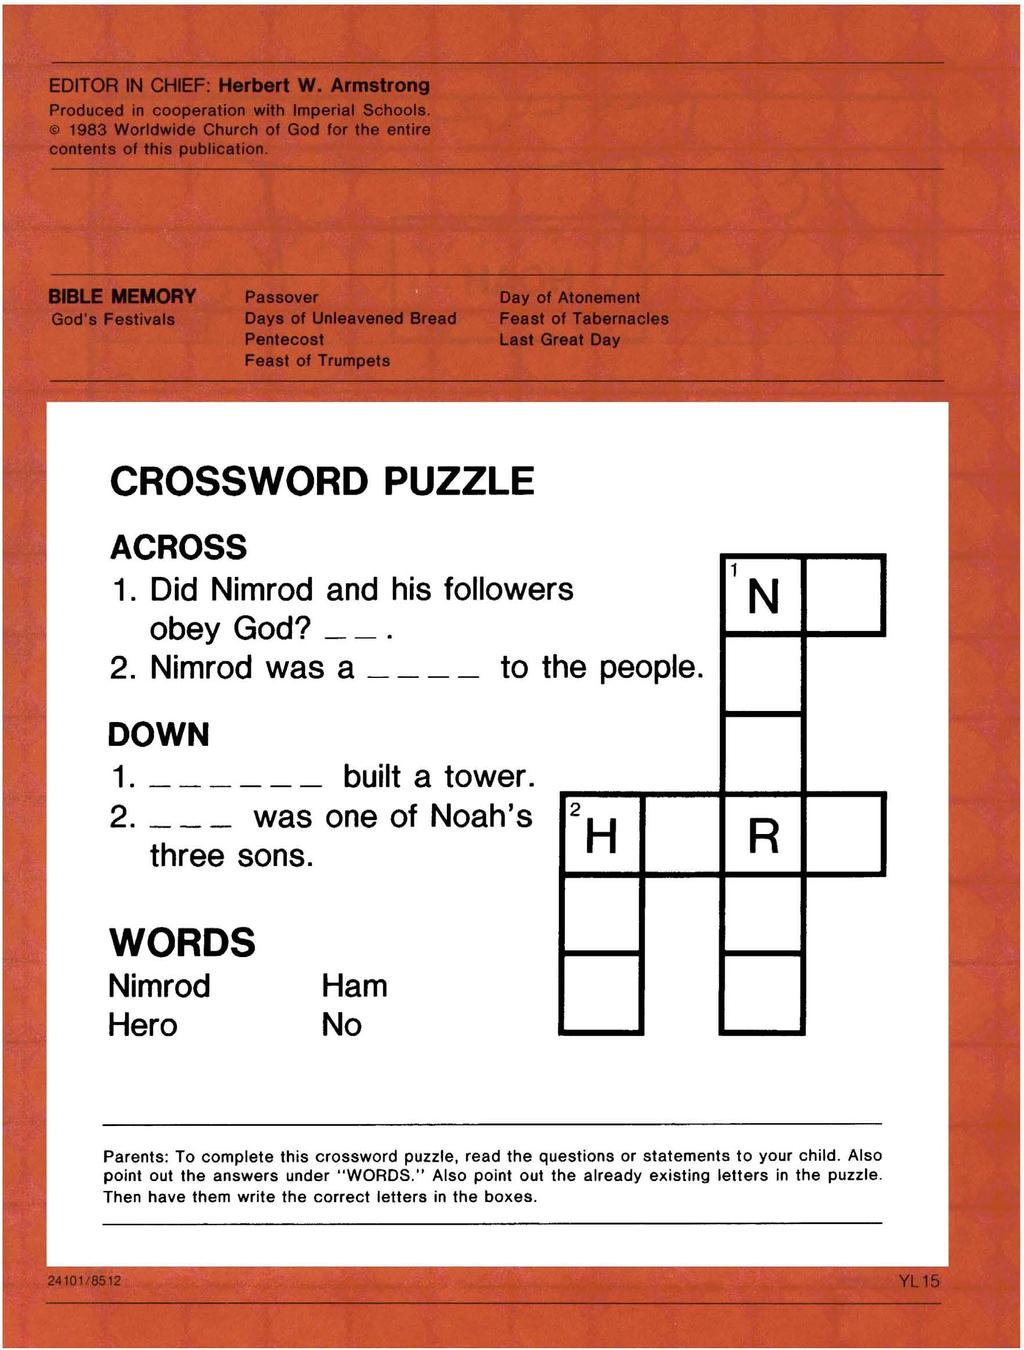 CROSSWORD PUZZLE ACROSS 1. Did Nimrod and his follower S obey God? _ -. 2. Nimrod was a to t he people. 1 N DOWN 1. built a tower. 2. was one of Noah's three sons.